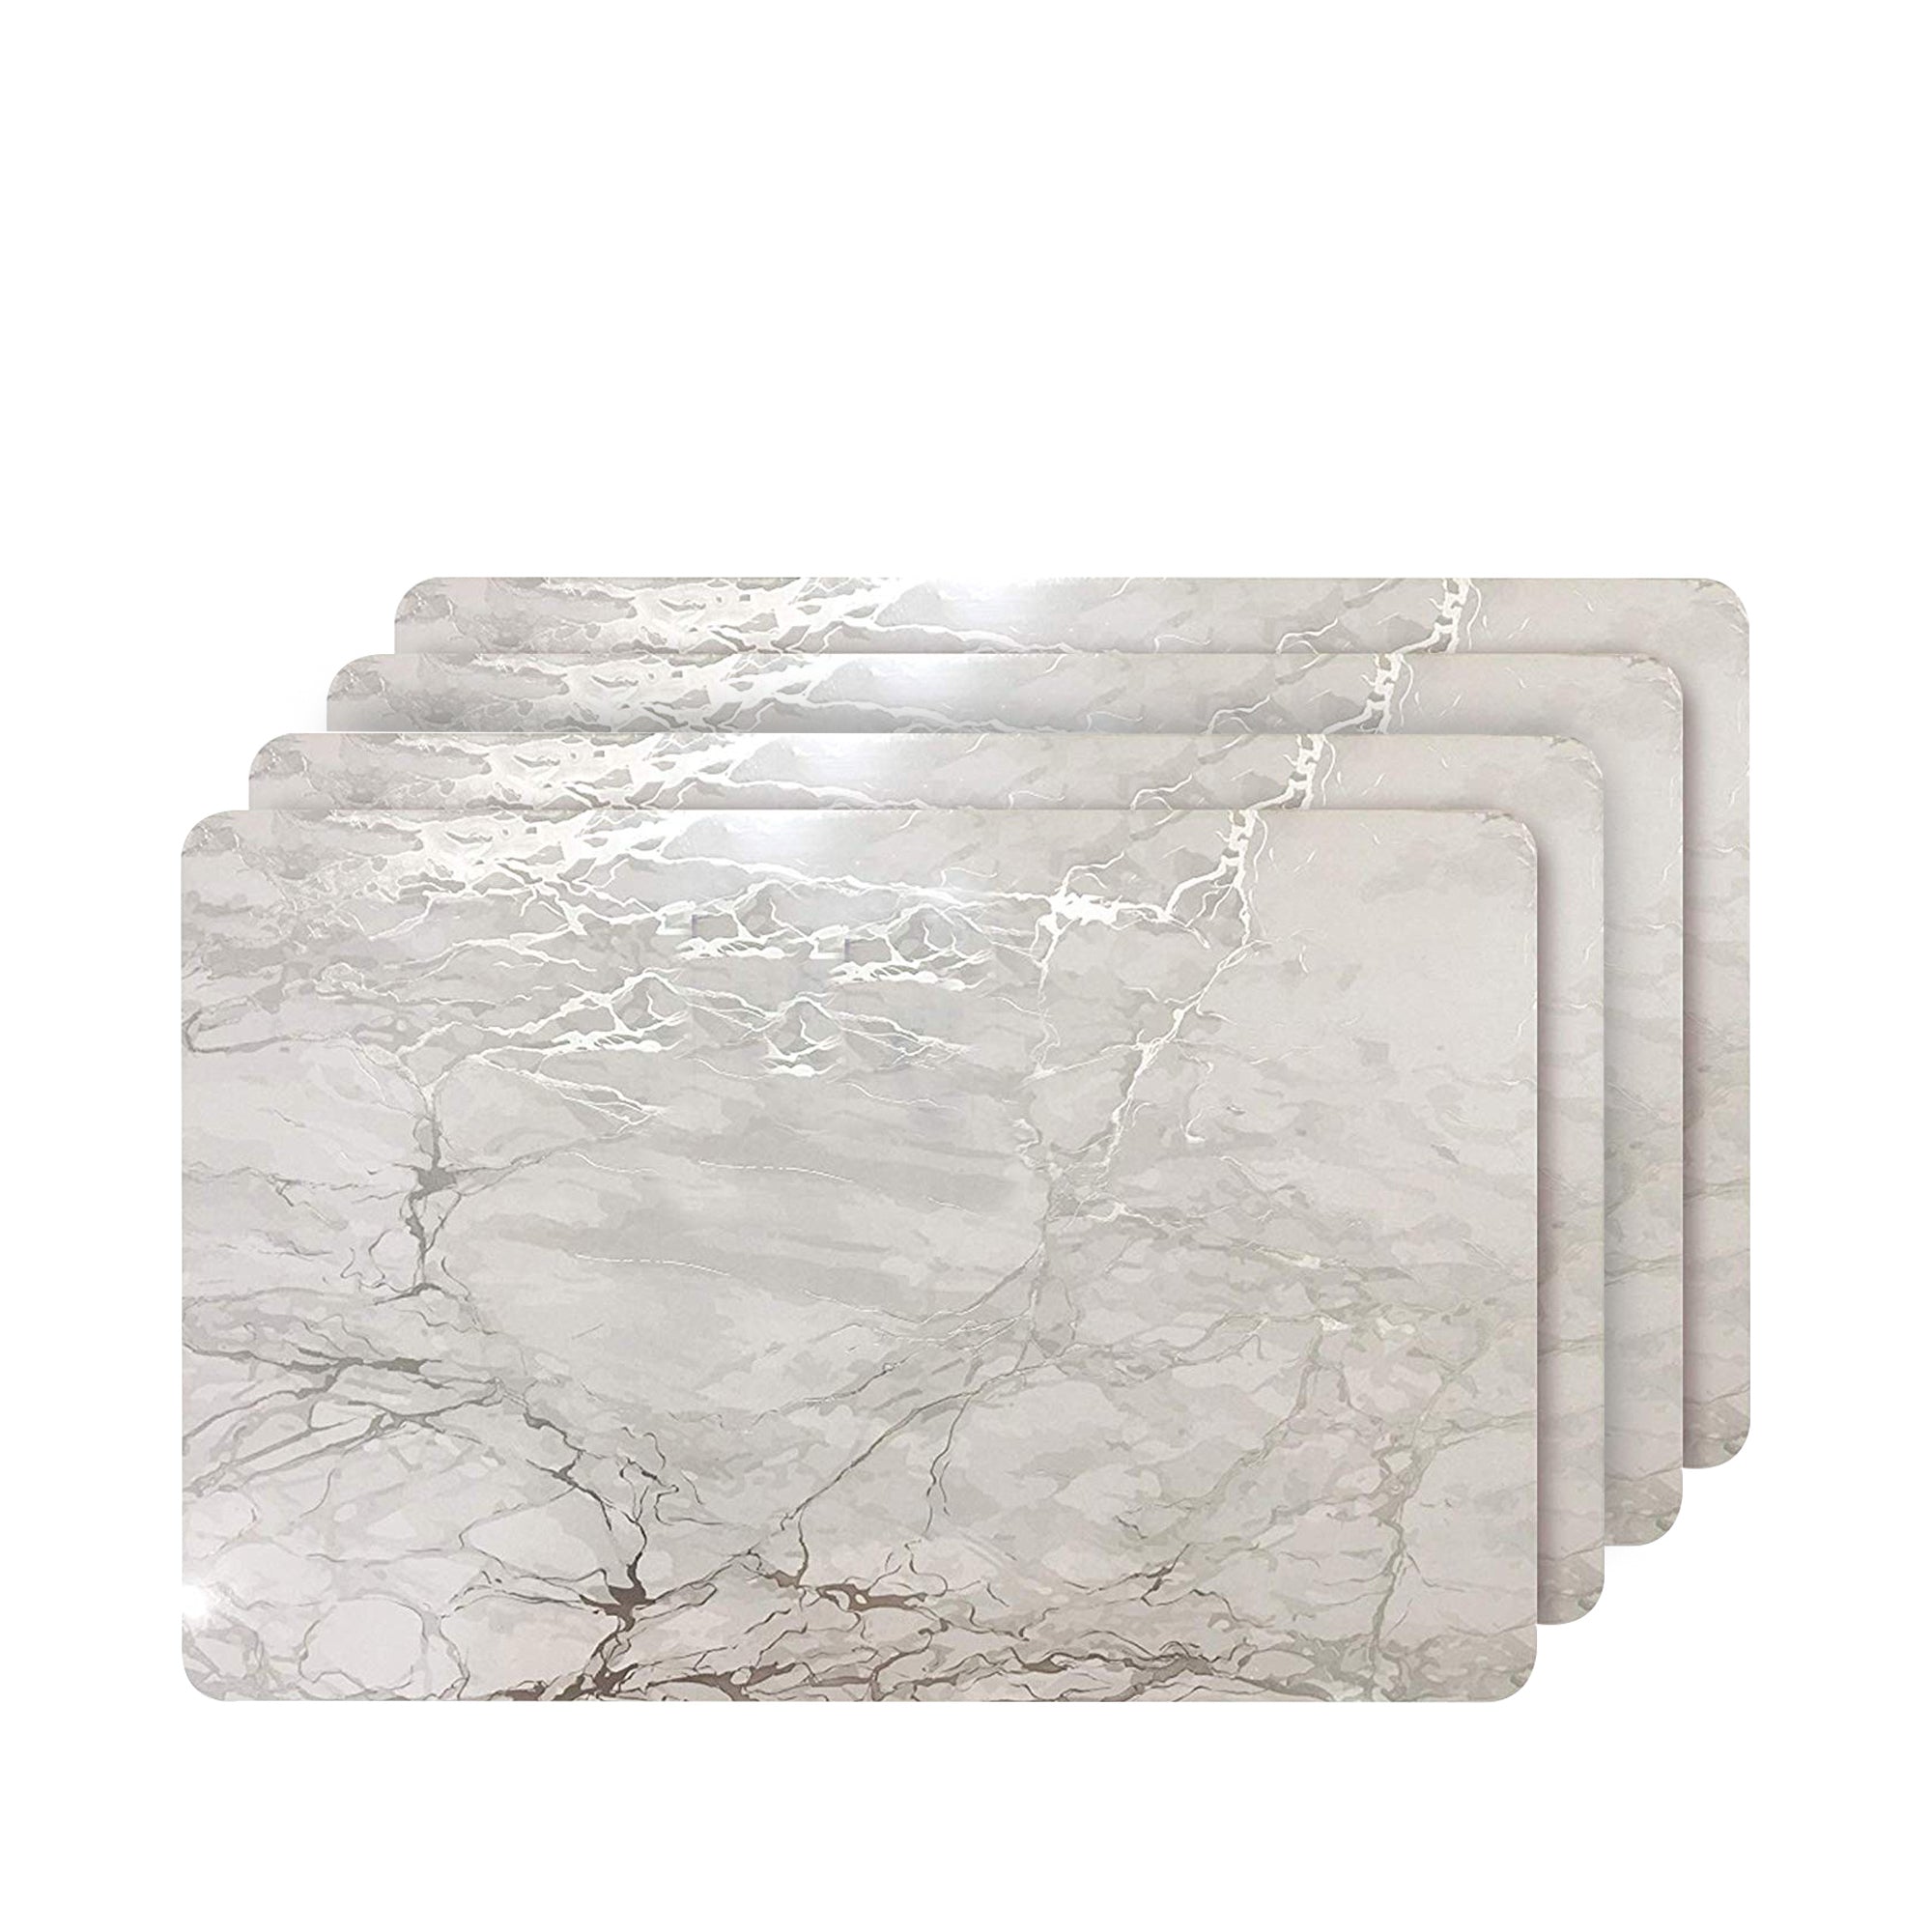 Dainty Home Marble Cork Foil Printed Marble Granite Designed Thick Cork Textured 12" x 18" Rectangular Placemats